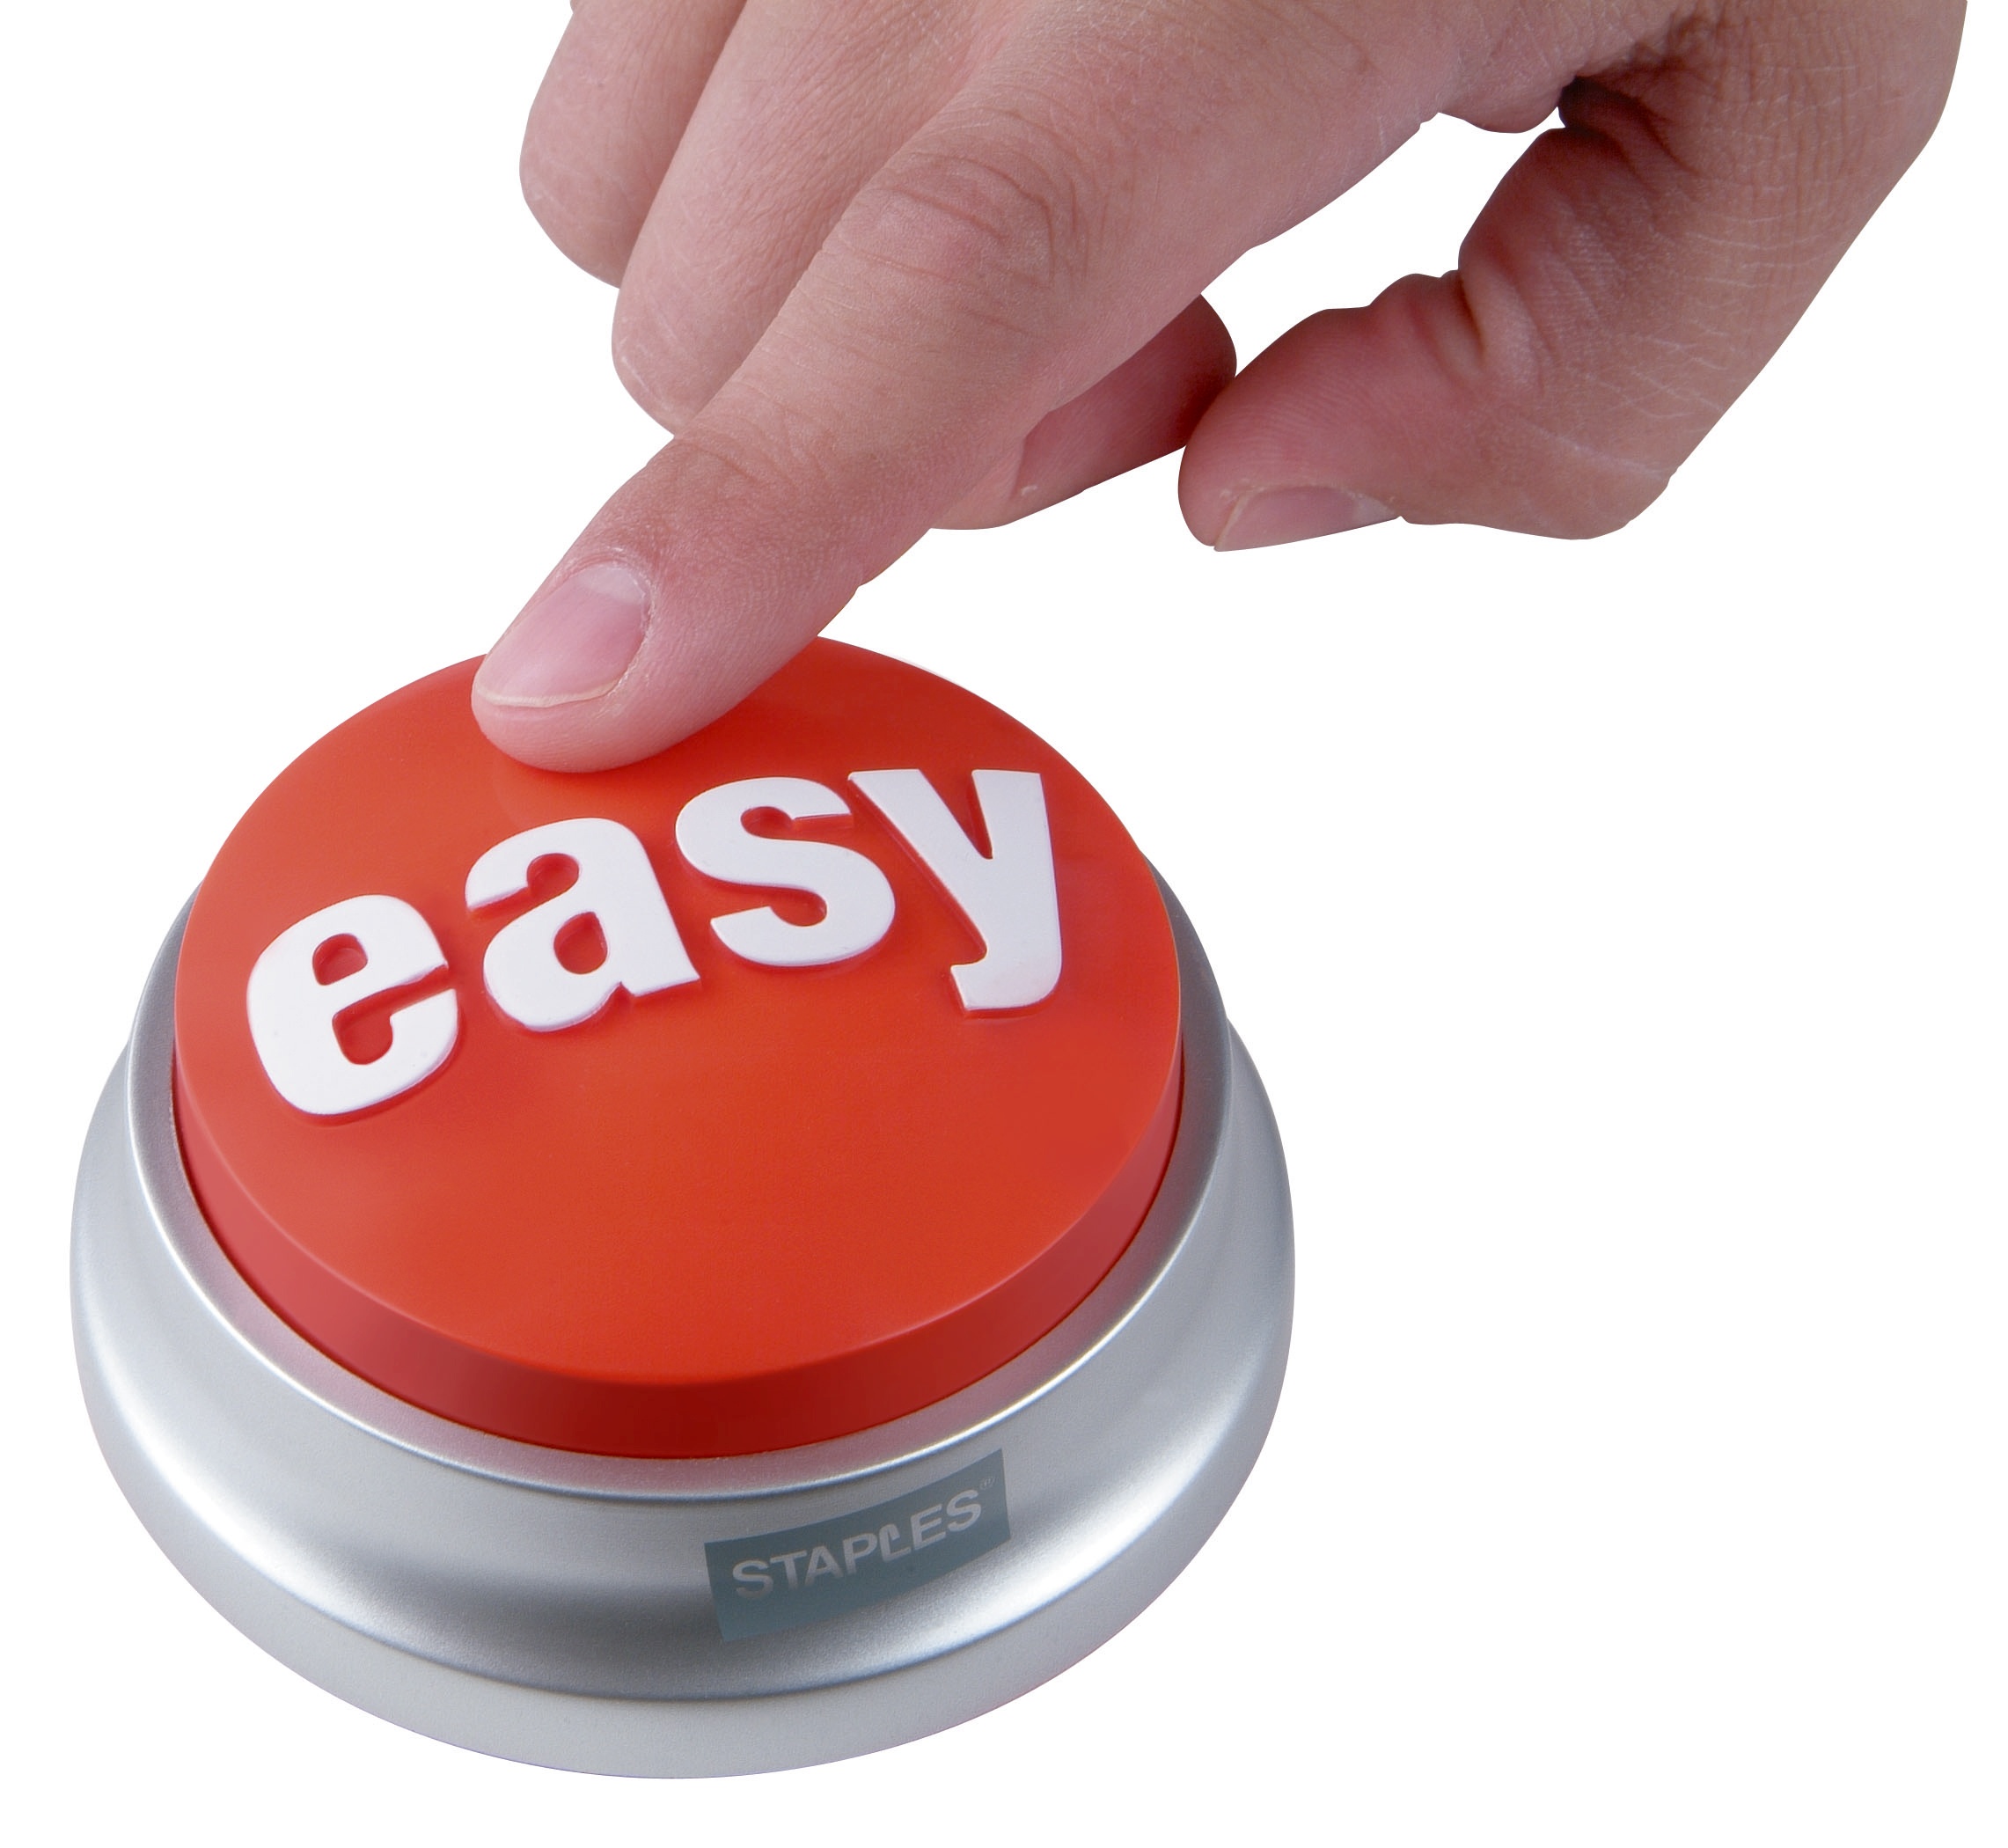 Finally, A Button That Actually DOES Something. - birdsong gregory